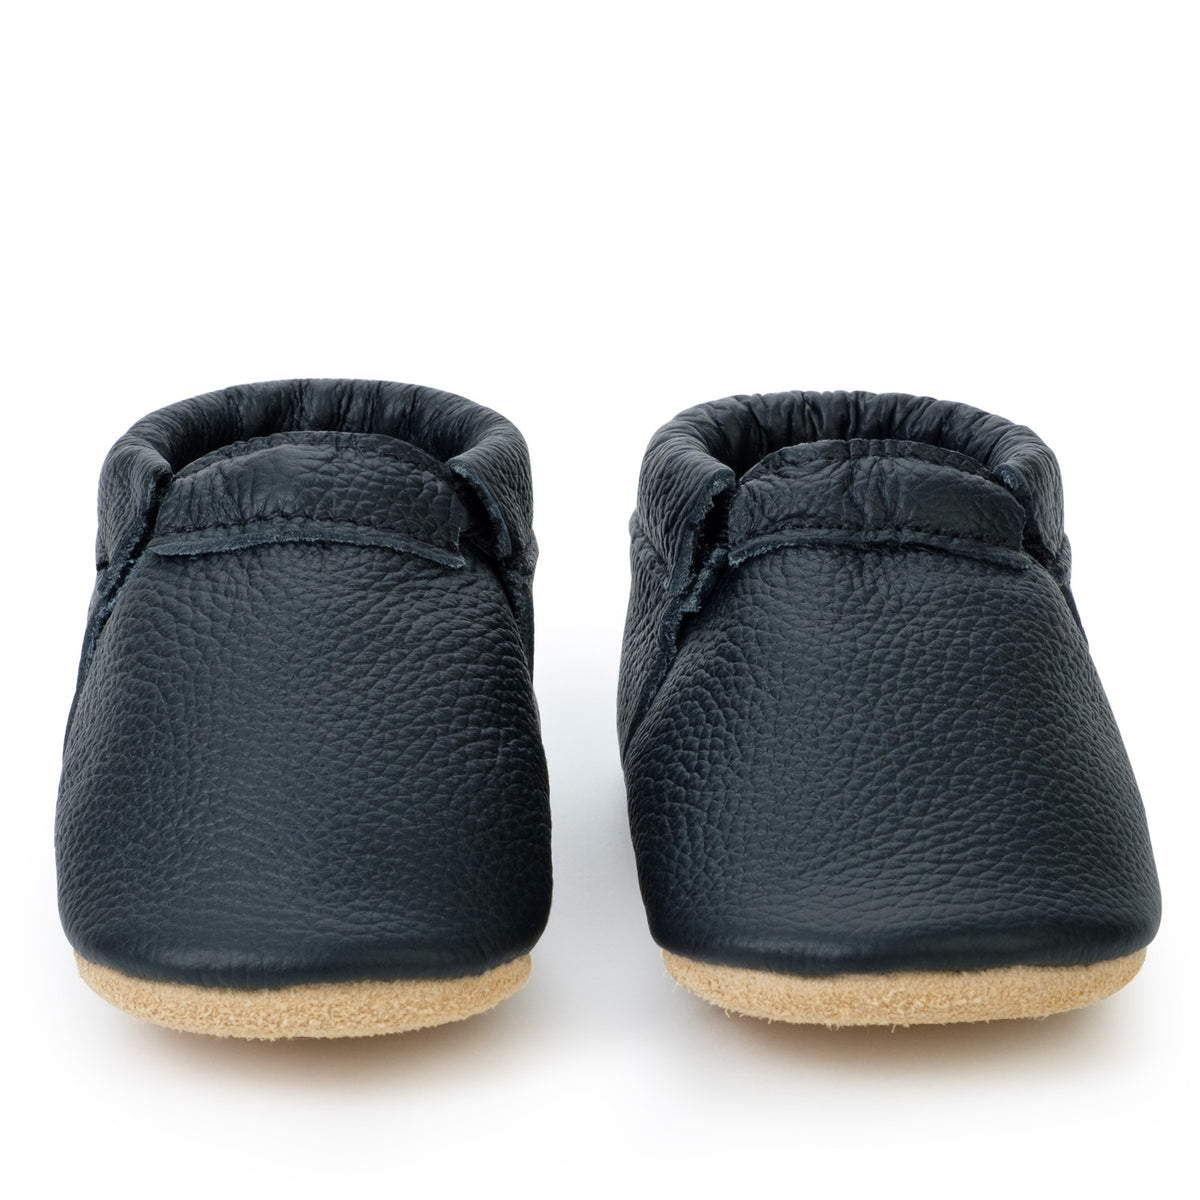 Black and Tan Fringeless Baby Moccasins, Genuine Leather | BirdRock Baby